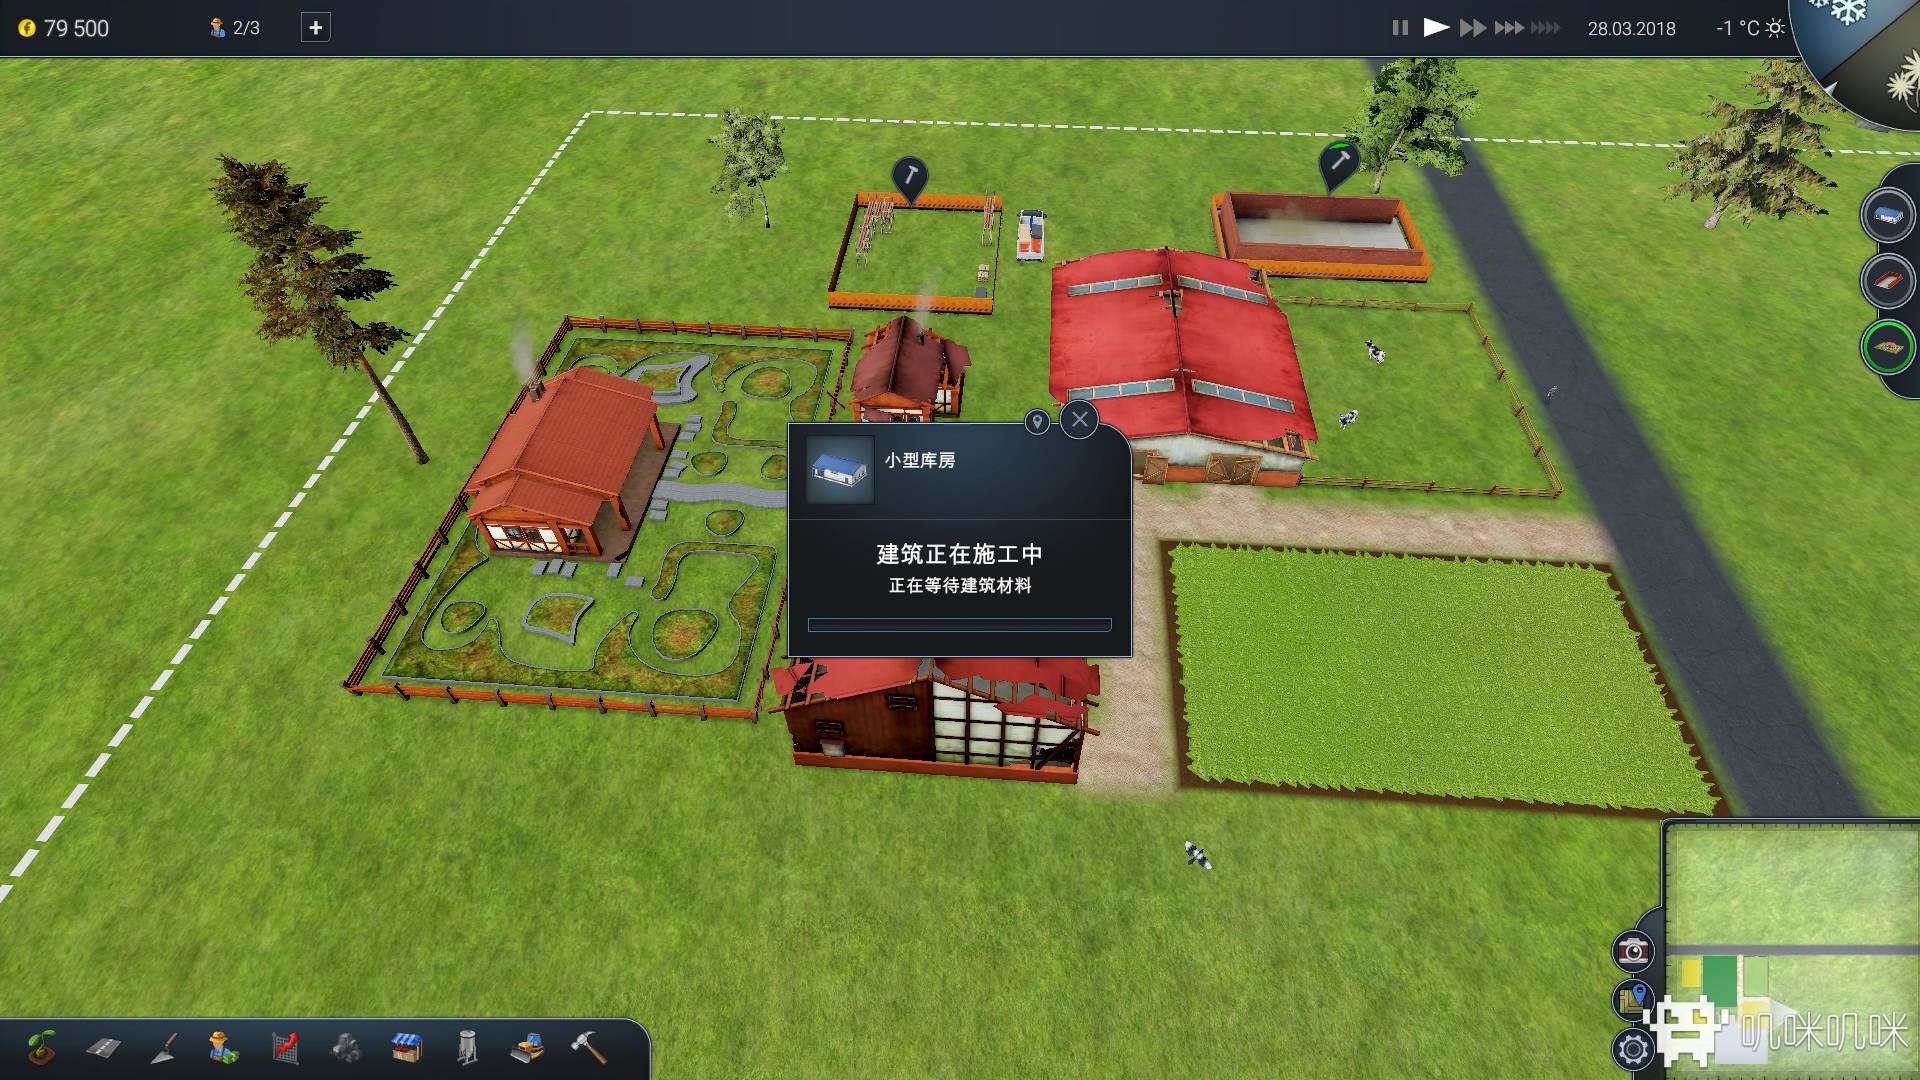 Farm Manager 2018 - Brewing & Winemaking DLC游戏评测20190807002